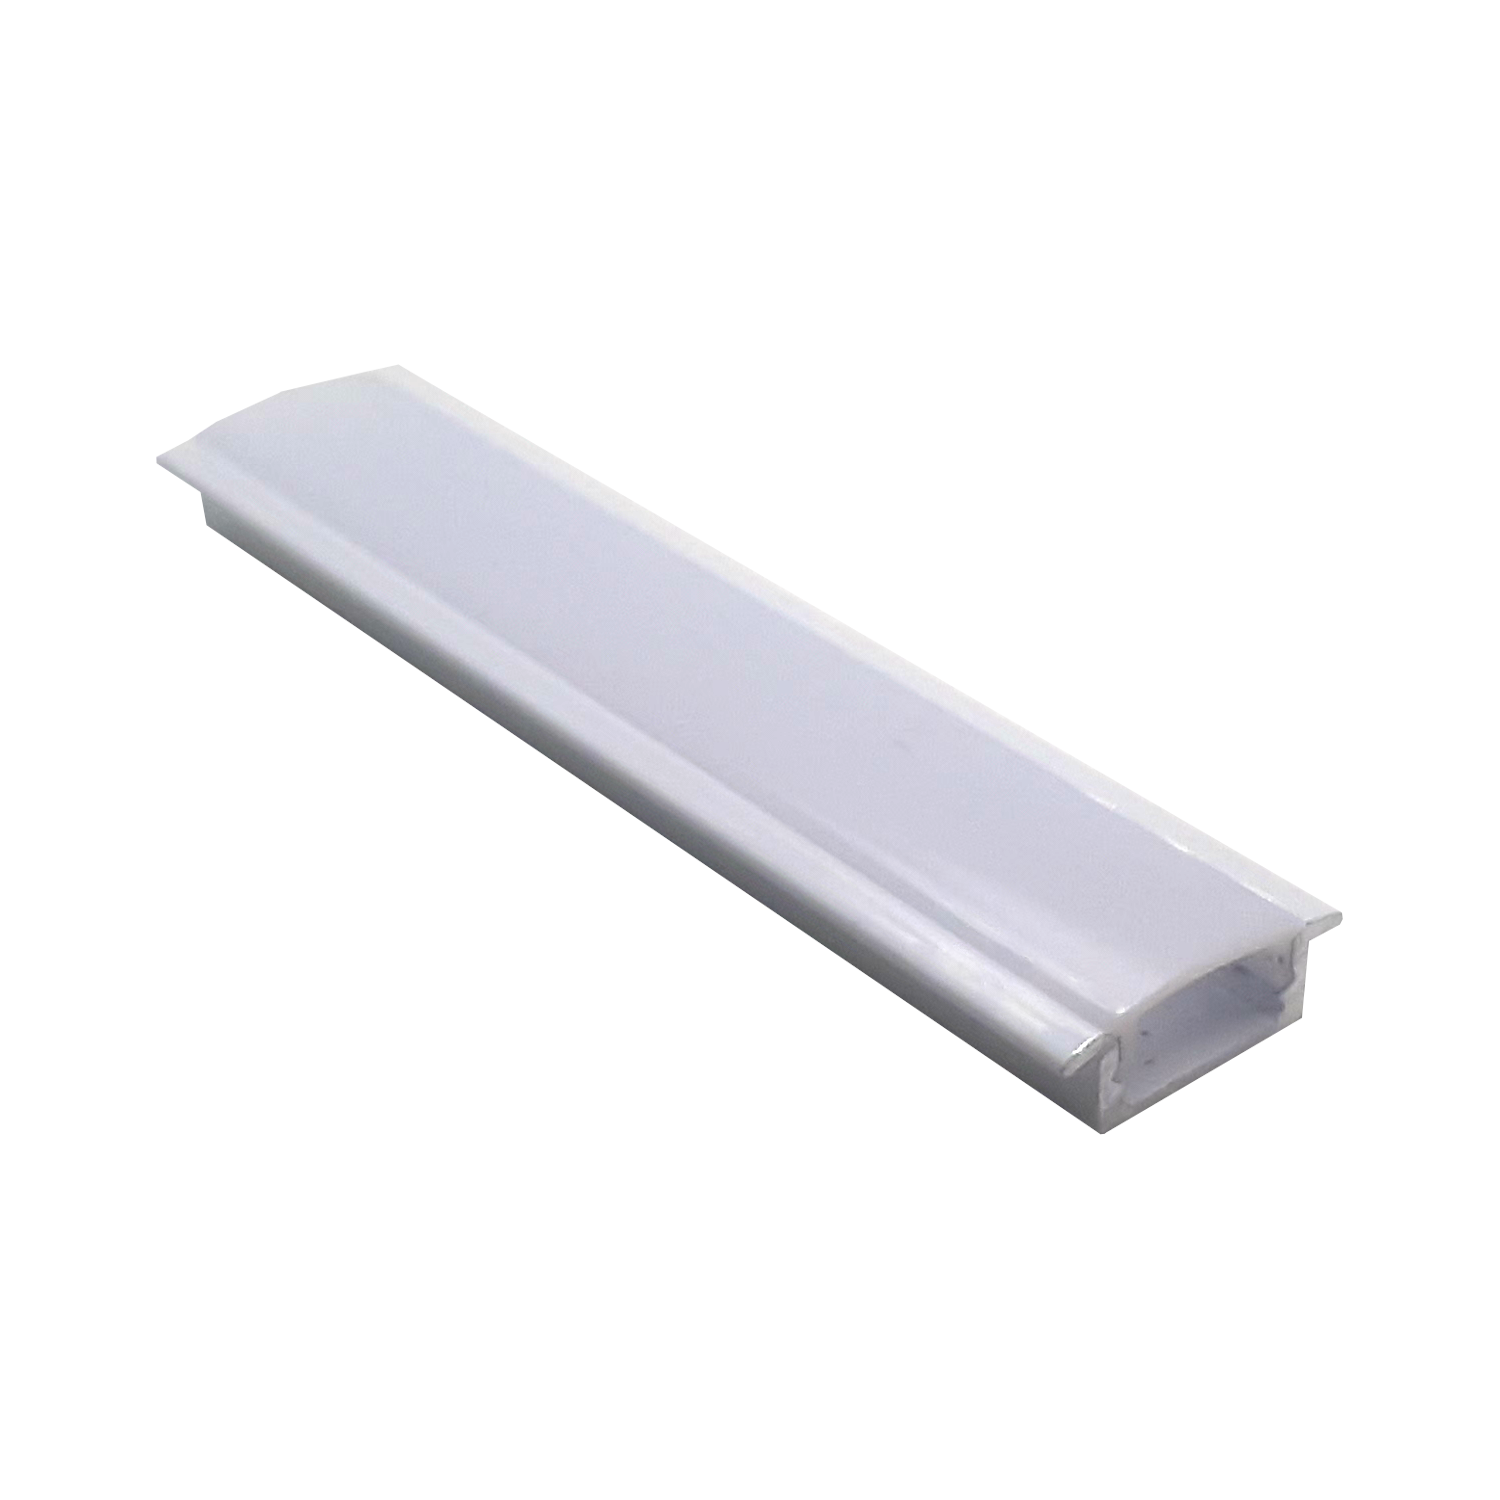 Product image of LXT13 White Shallow Extrusion with wings for LED Strip